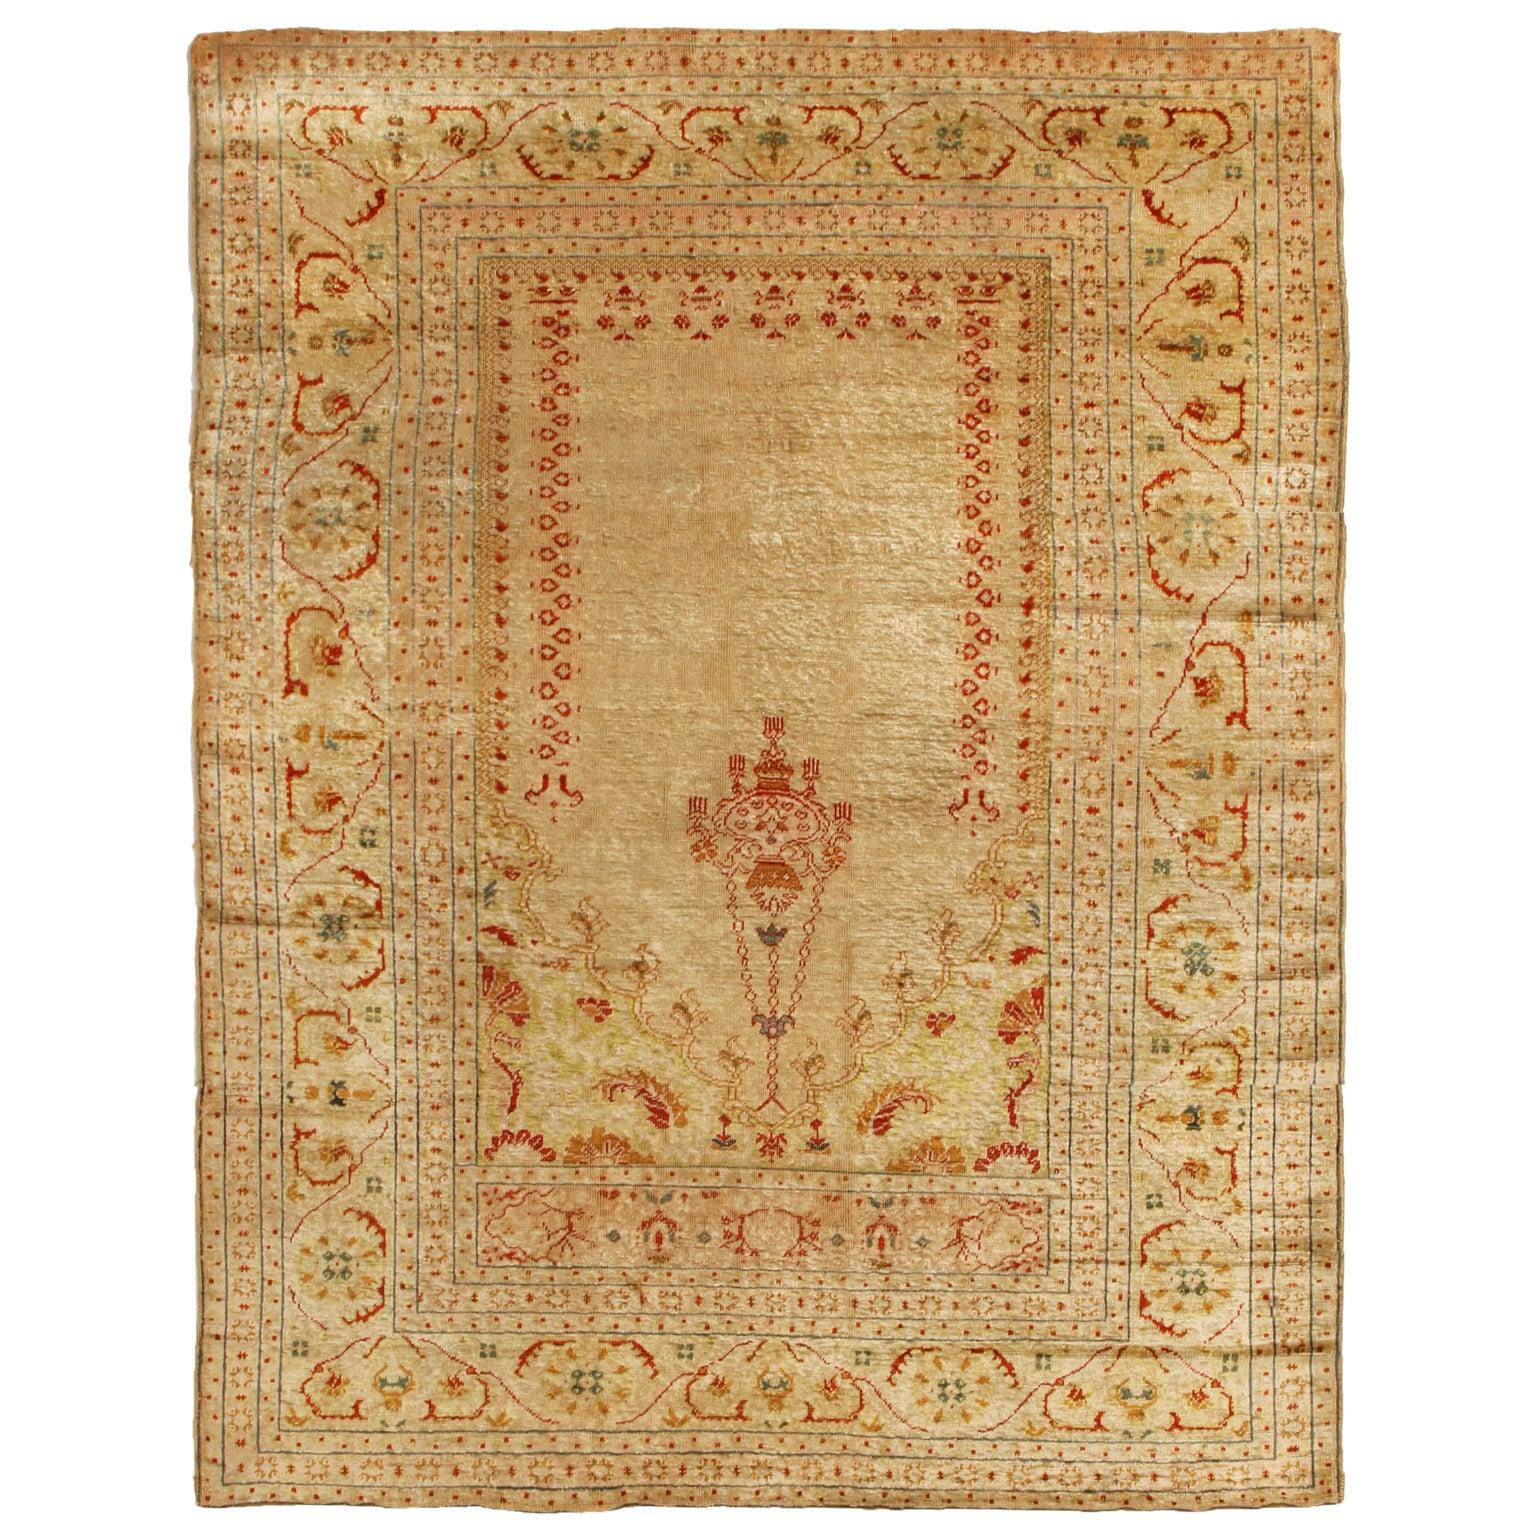 Antique Tabriz Beige and Red Persian Wool Rug by Rug & Kilim